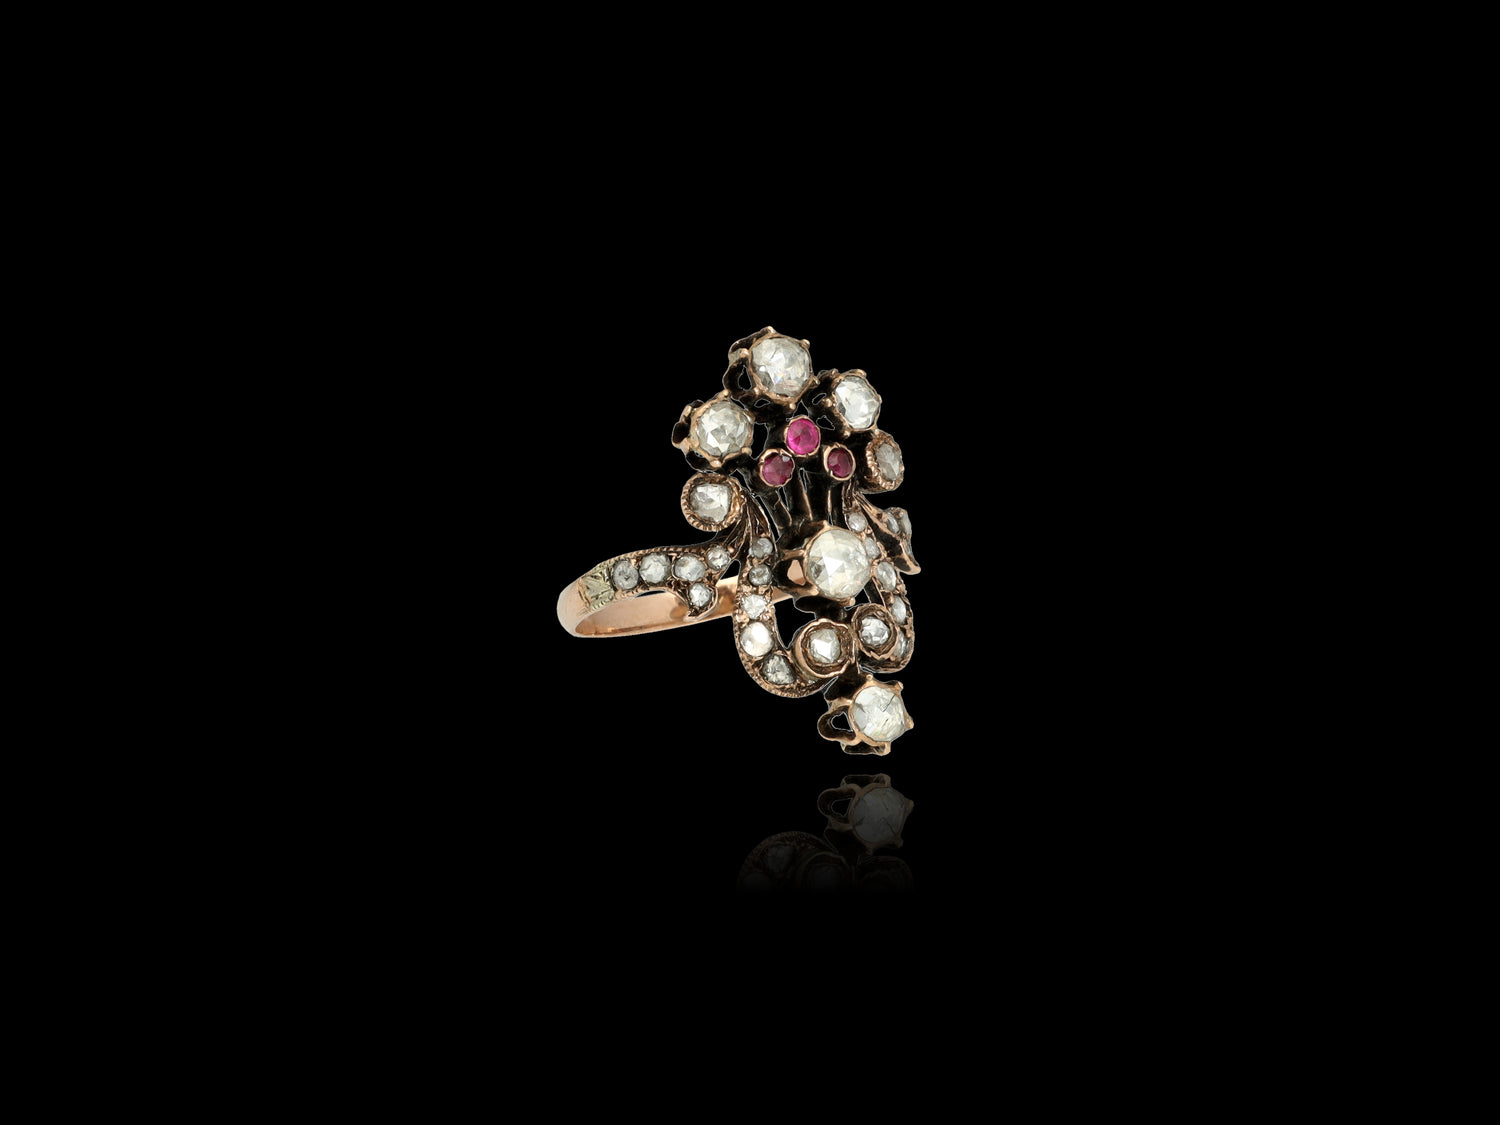  A statement ring that evokes the spirit of romance, this antique beauty features 29 old Rose-cut diamonds forming a lovely flower bouquet along with three 0.05 CT natural rubies. The diamonds are preserved in a superb state with larger 7 stones.